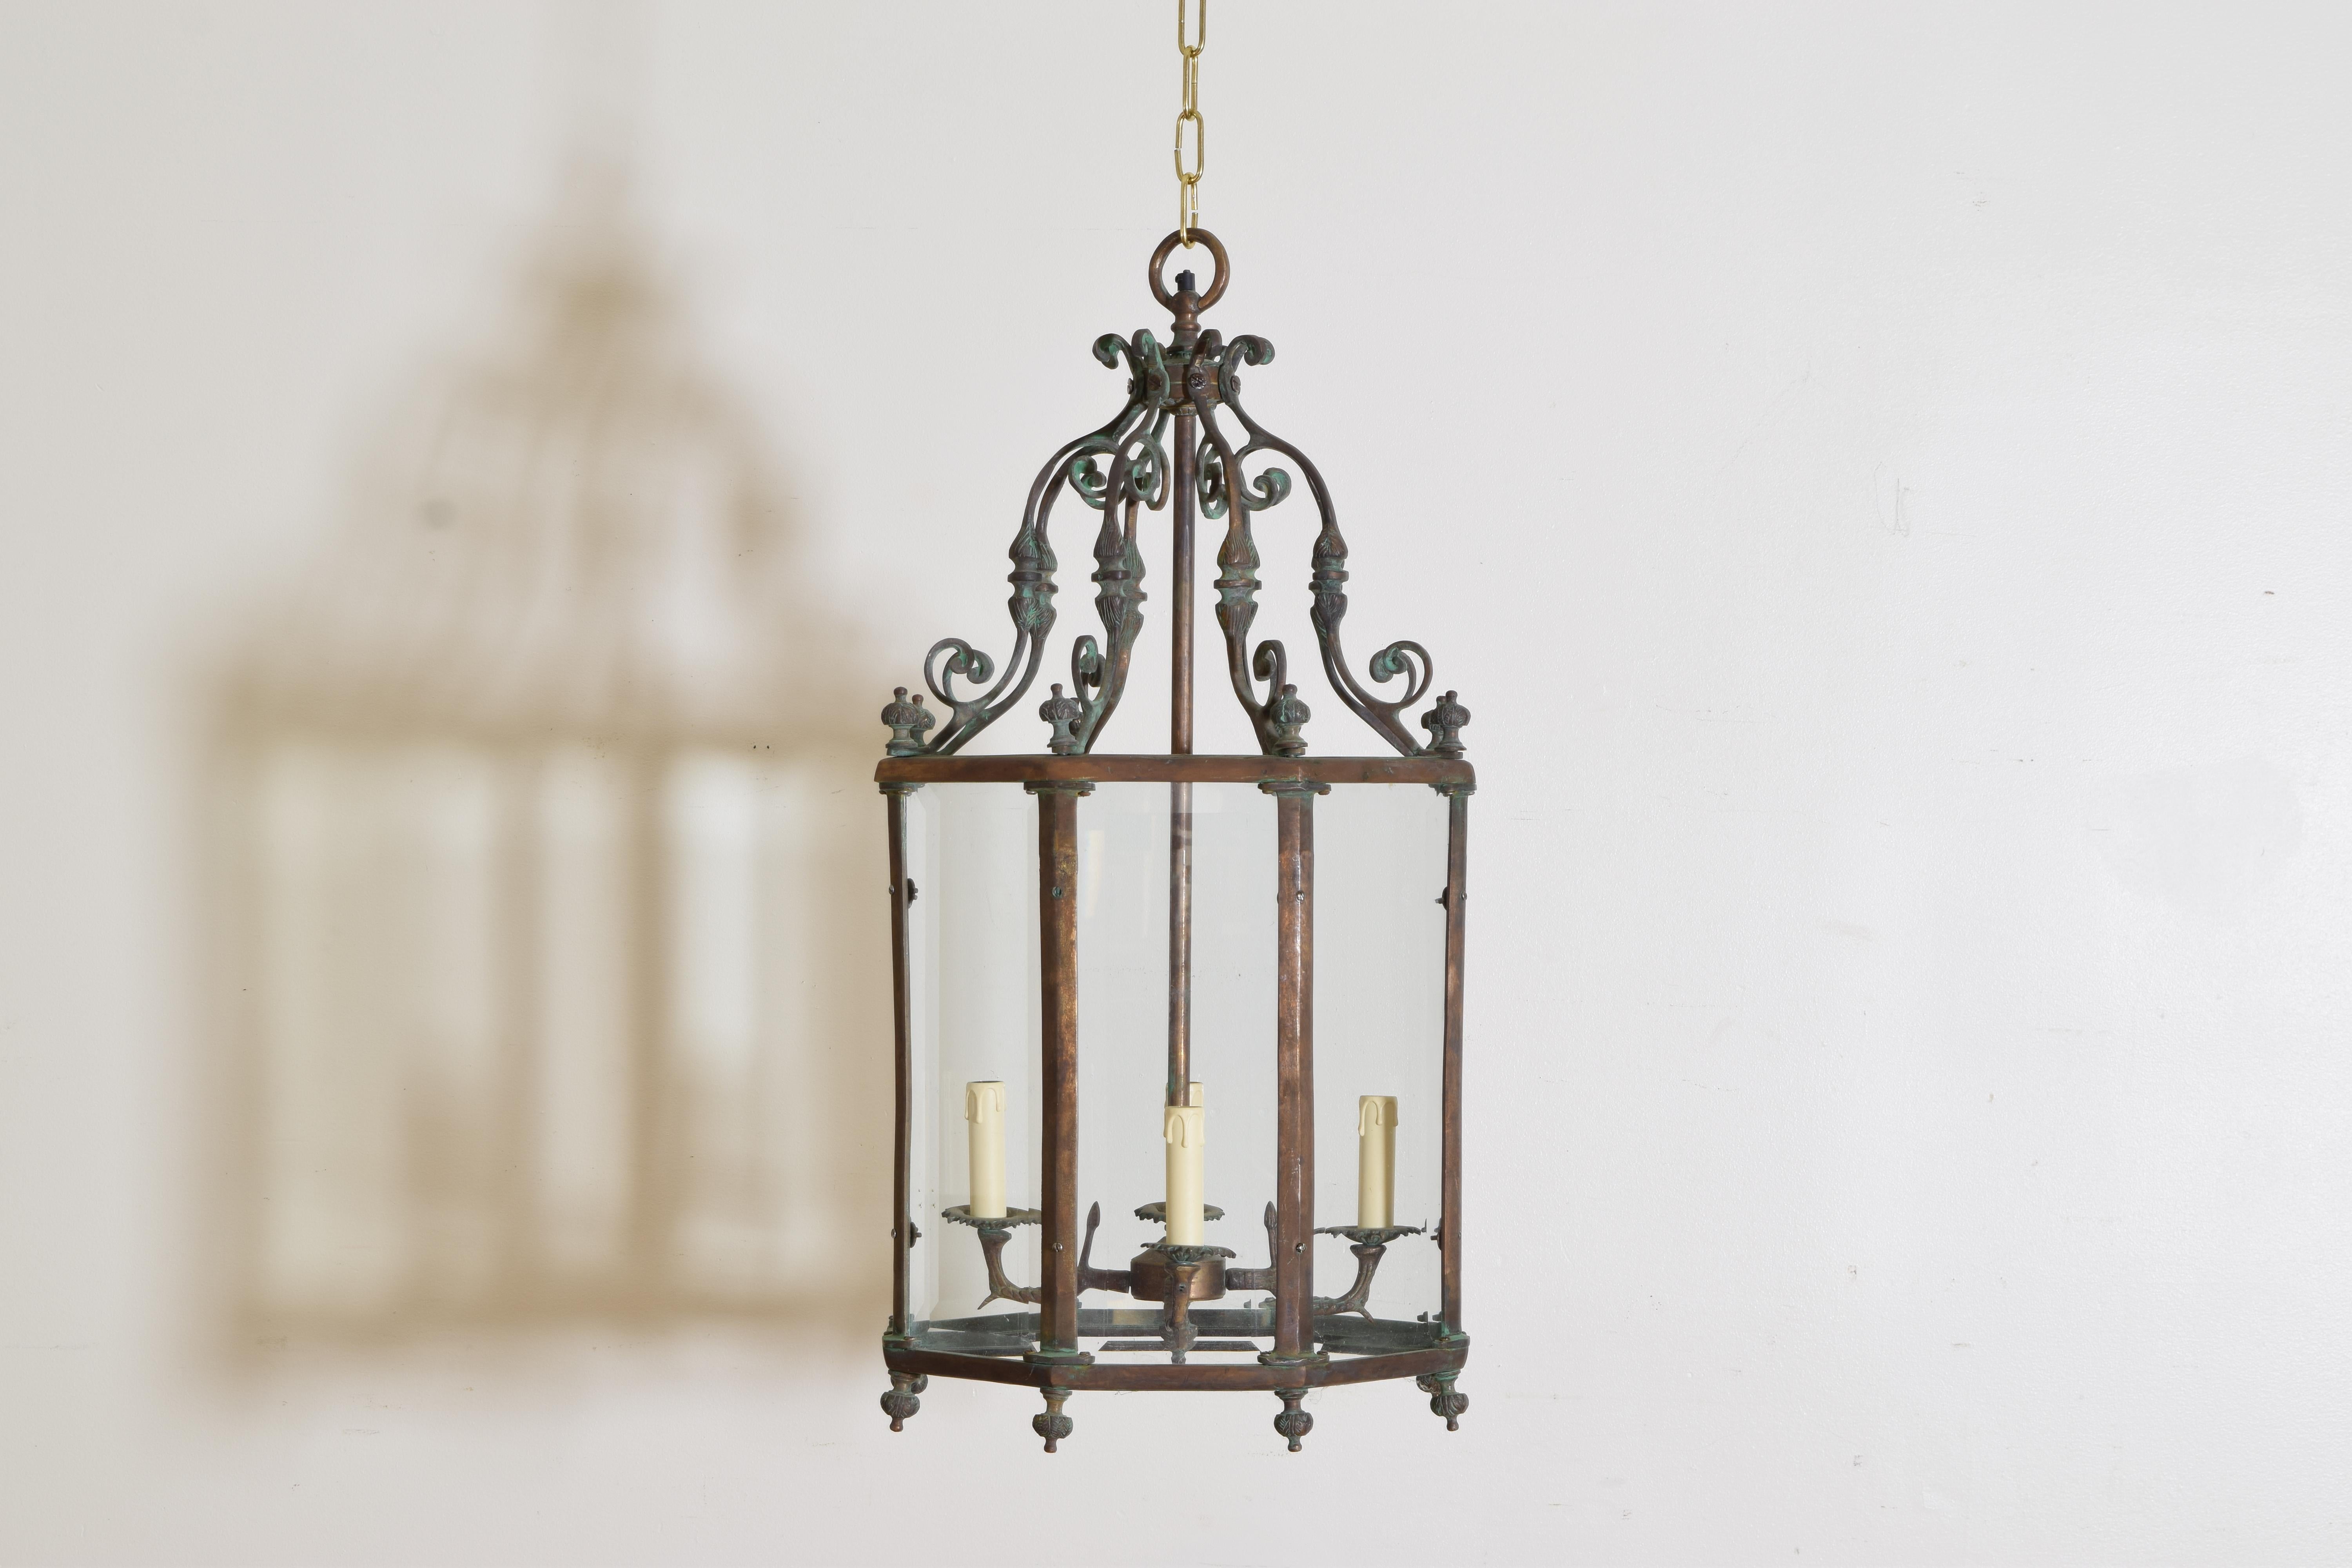 Hanging from a ring above a framework of brass scrolls, the body of this lantern is constructed of brass and copper and it houses individual panes of beveled glass, retaining its original cluster of four lights, with brass “feet” at intersections of